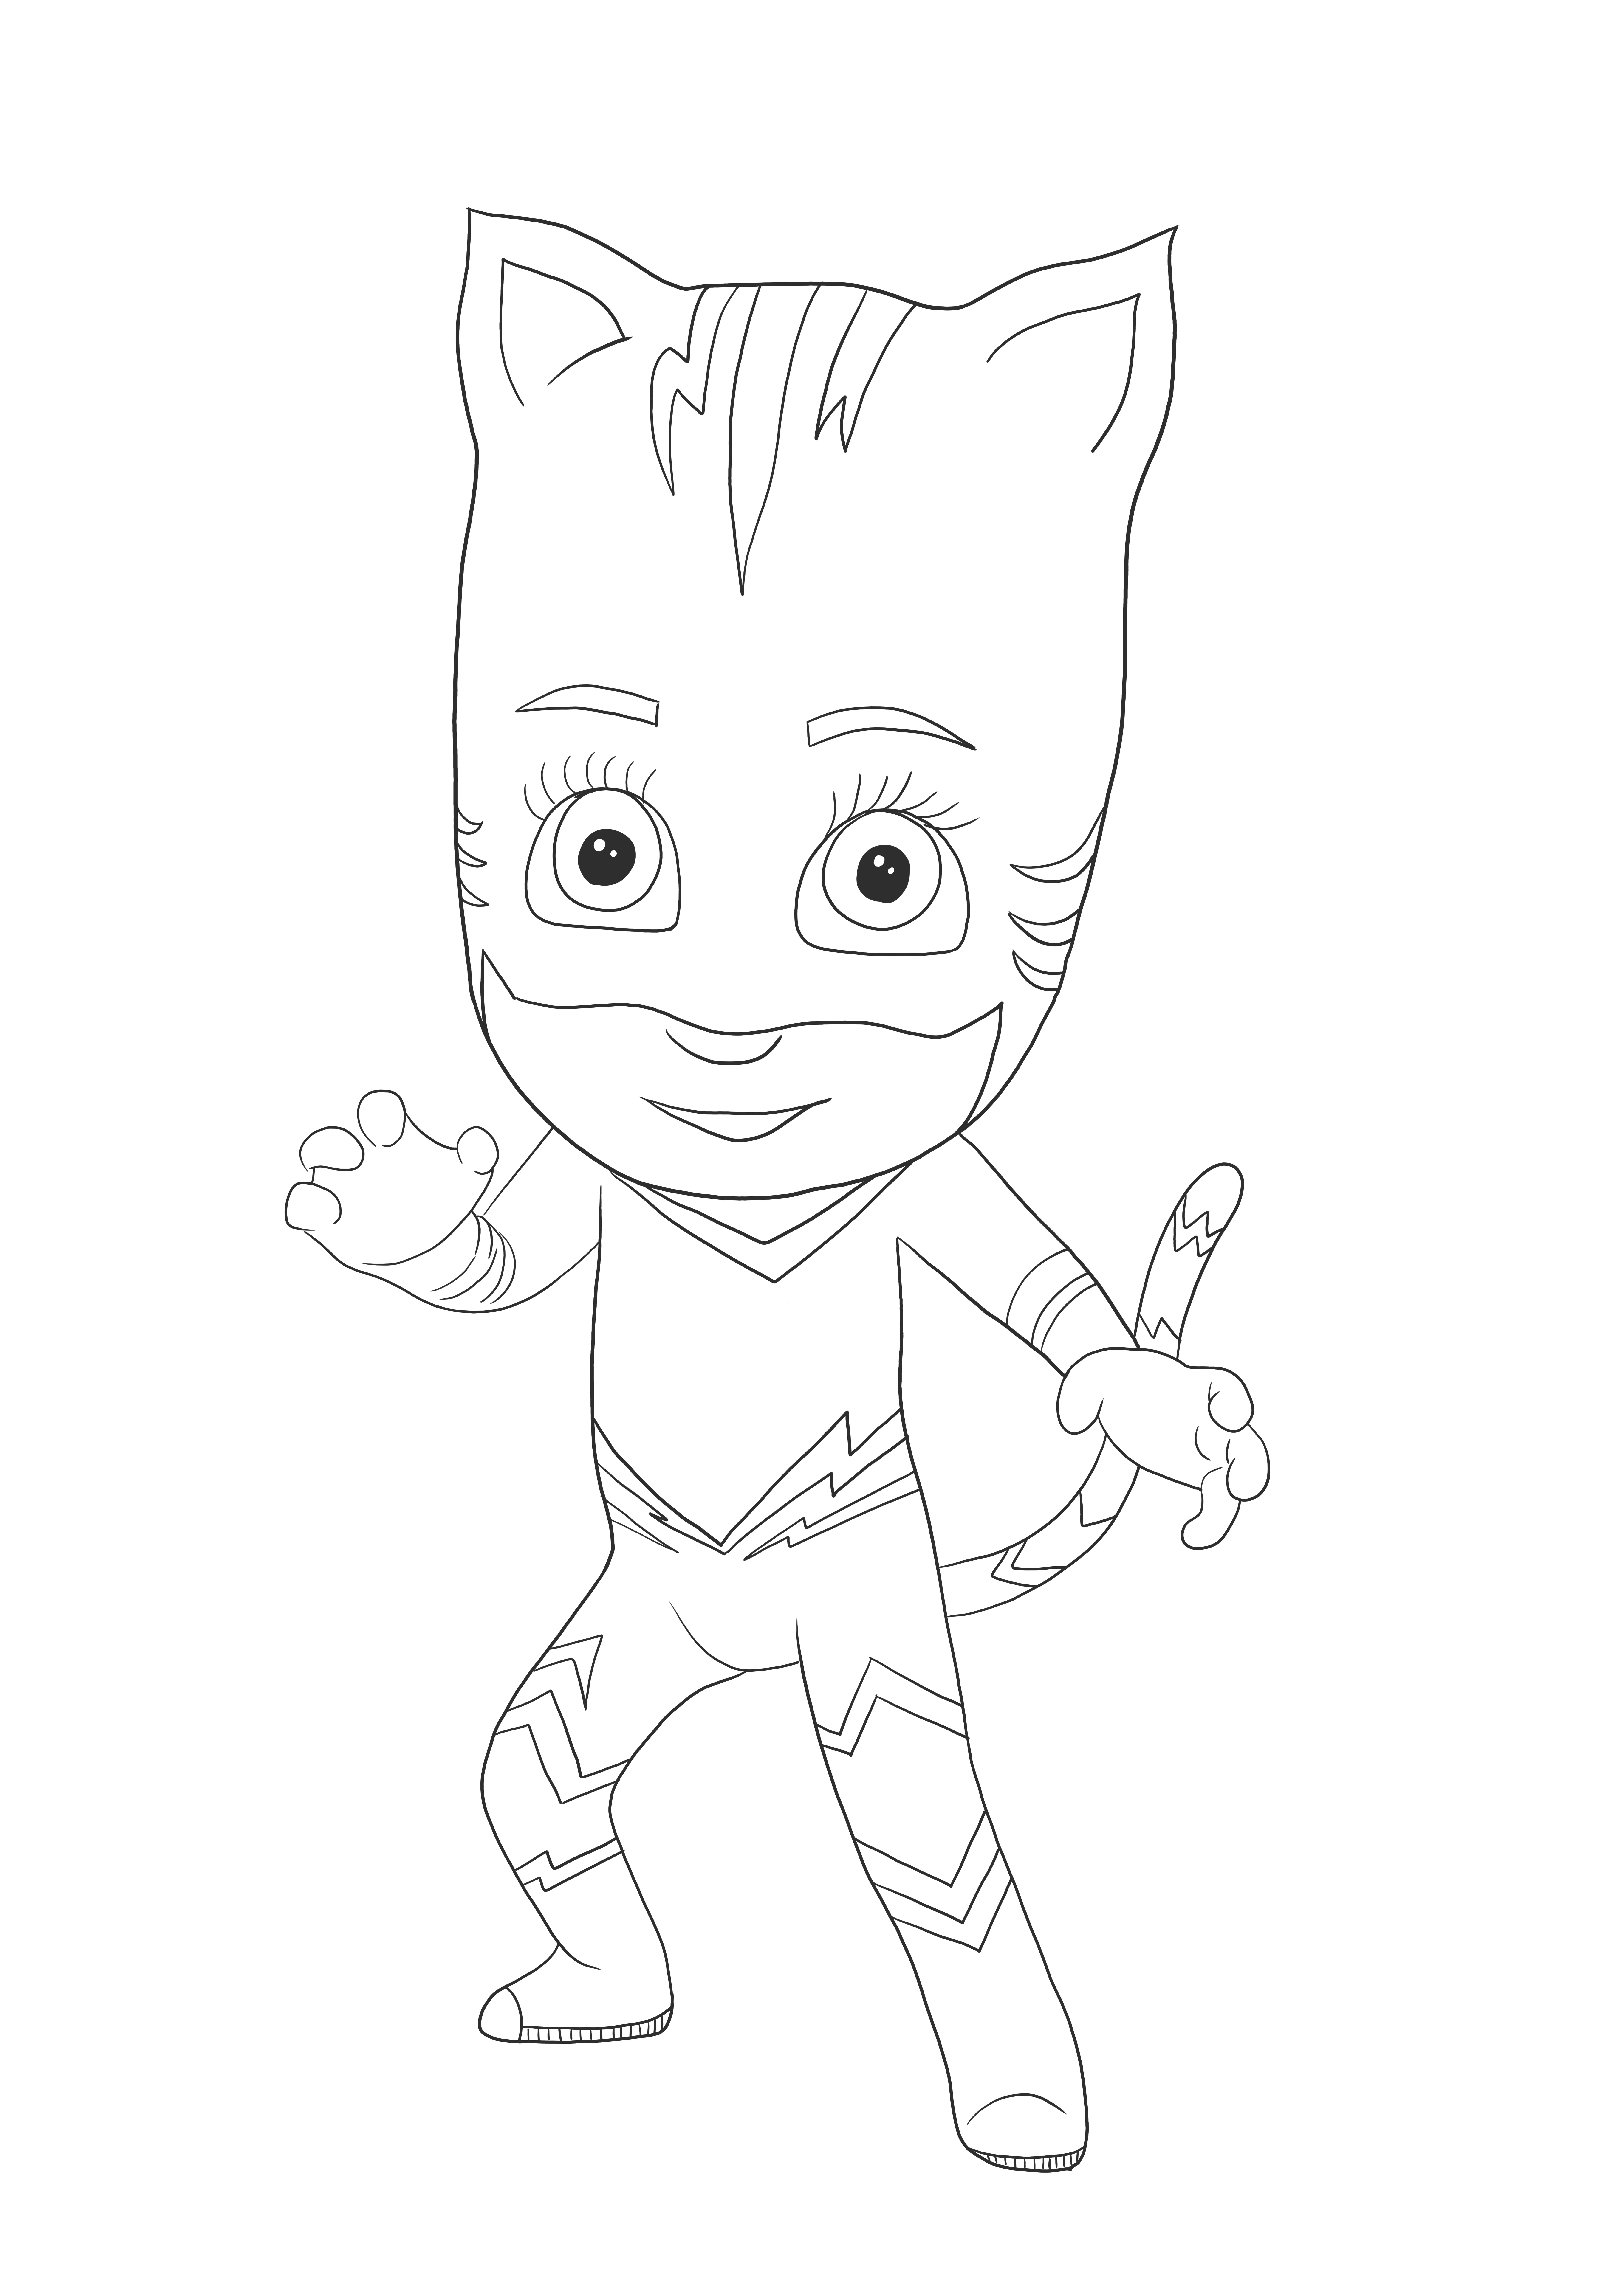 Catboy from PJ masks free coloring image for free printing